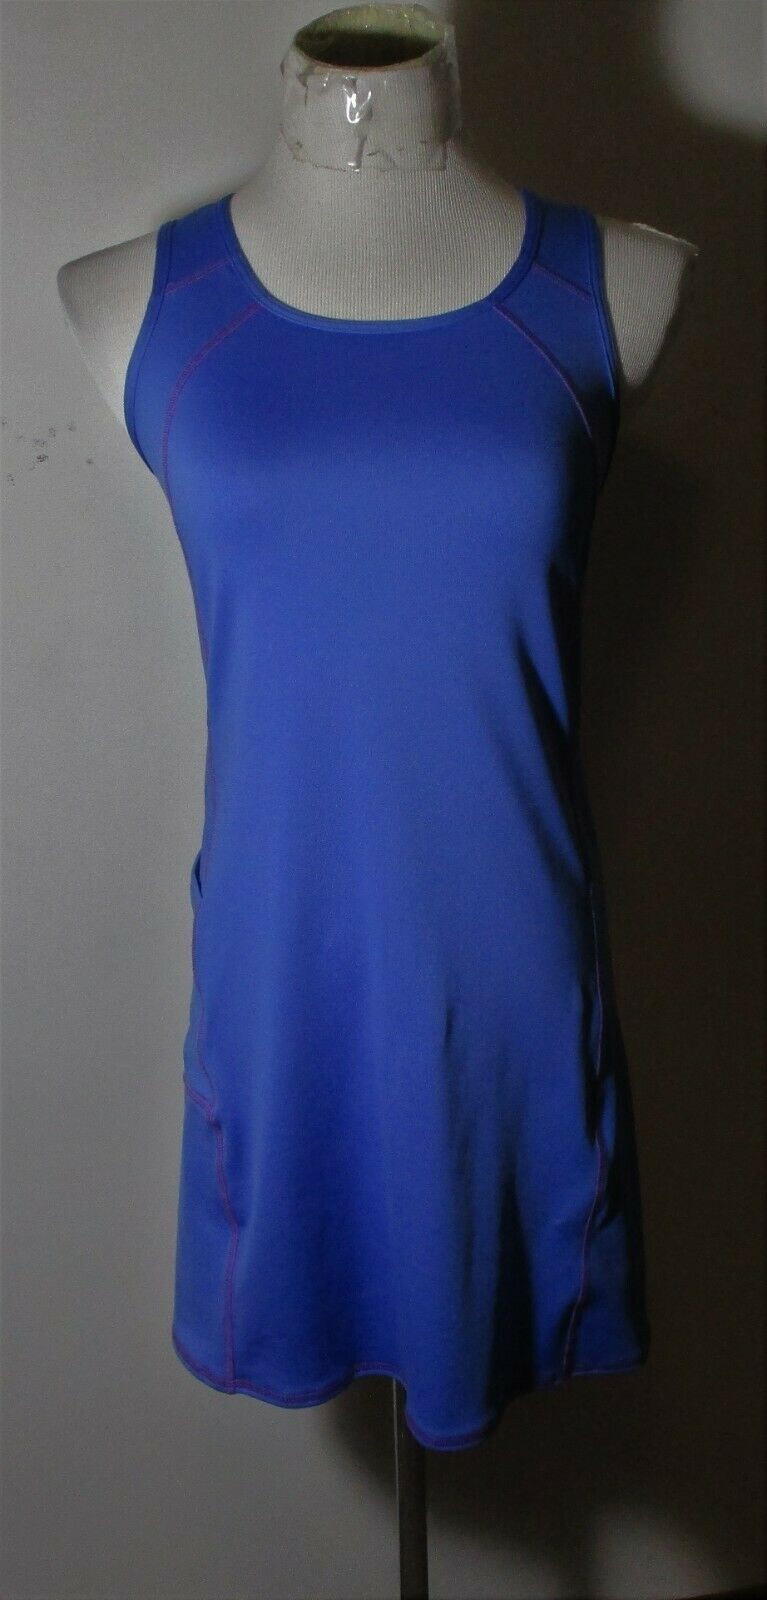 Girl's L.L. BEAN Blue Stretch Sleeveless Activewear Althetic Dress Size 14 NWOT